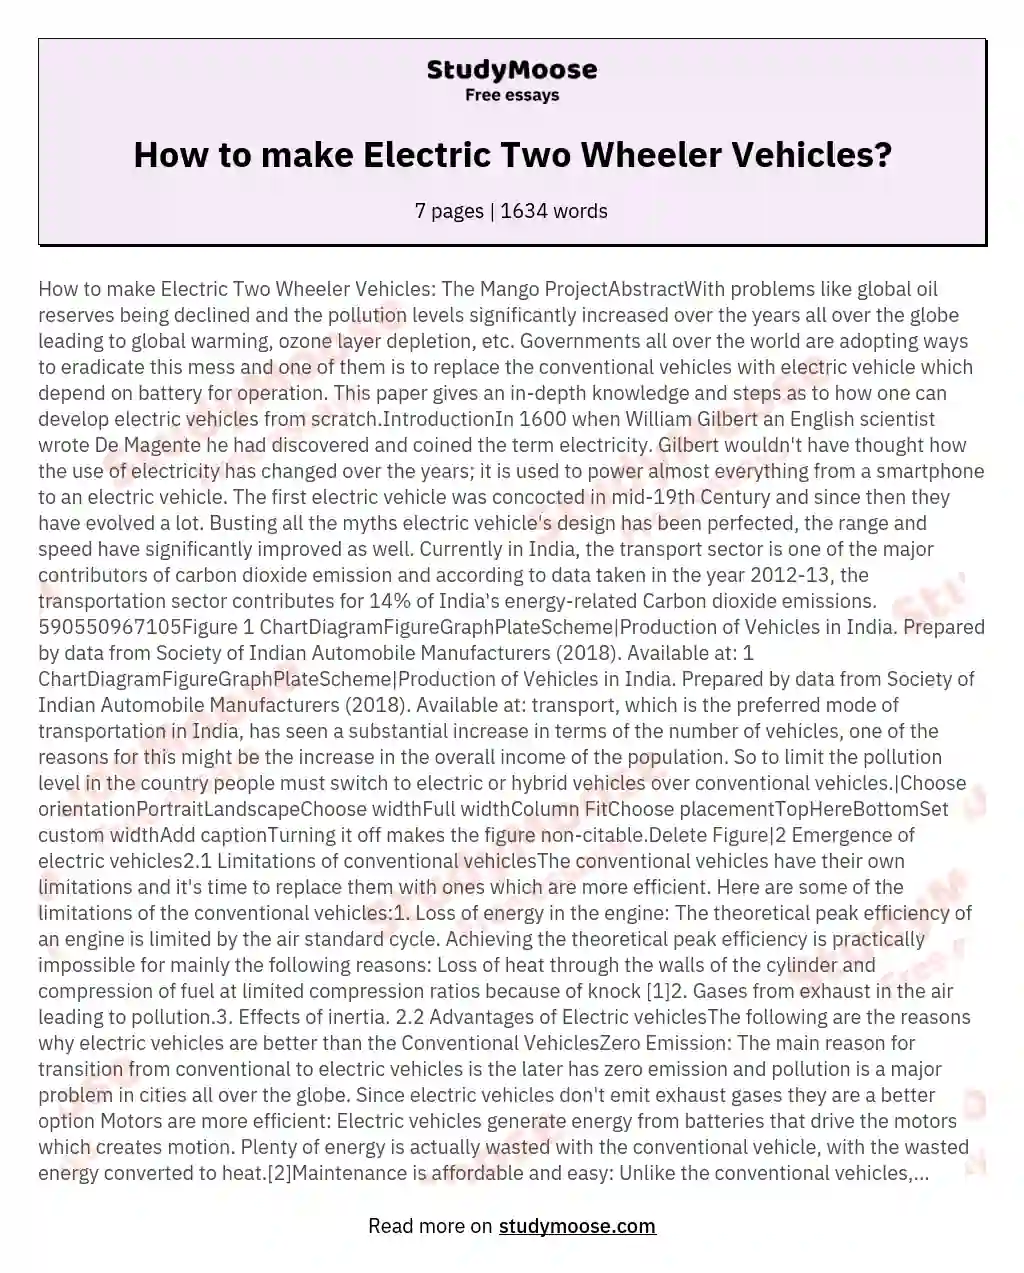 How to make Electric Two Wheeler Vehicles? essay